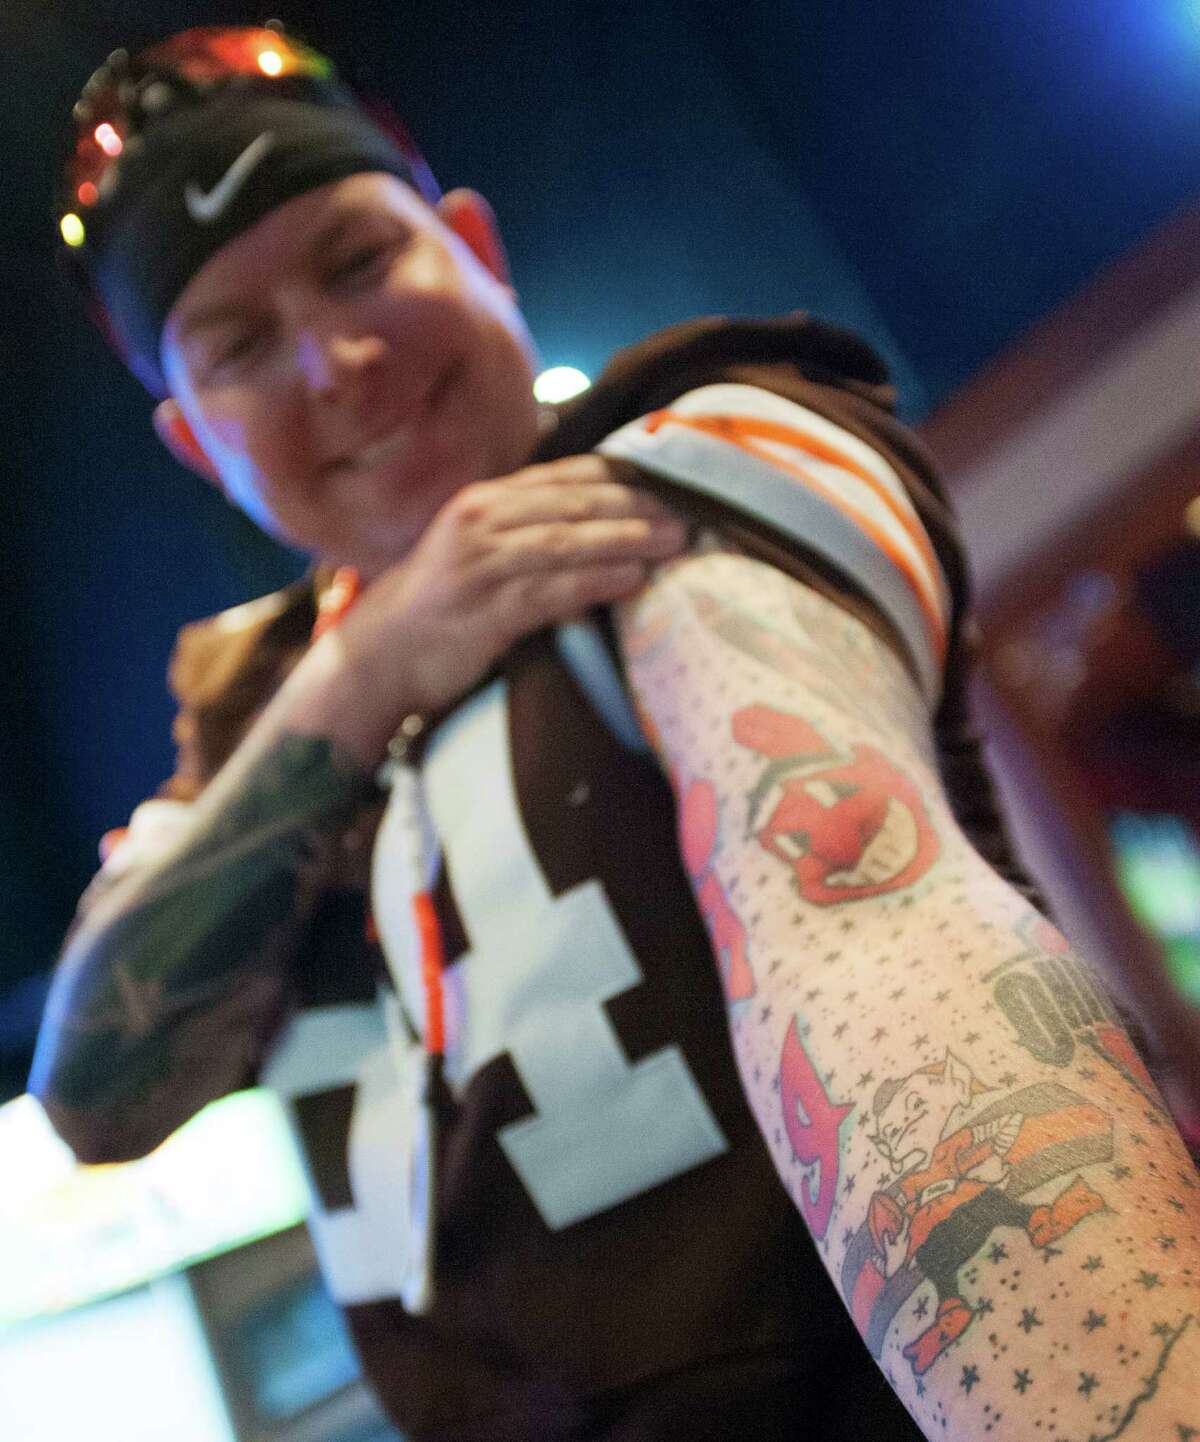 New York Man Gets Permanent Cleveland Browns Tim Couch Tattoo And Tim Couch  Loves It  xn90absbknhbvgexnp1ai443